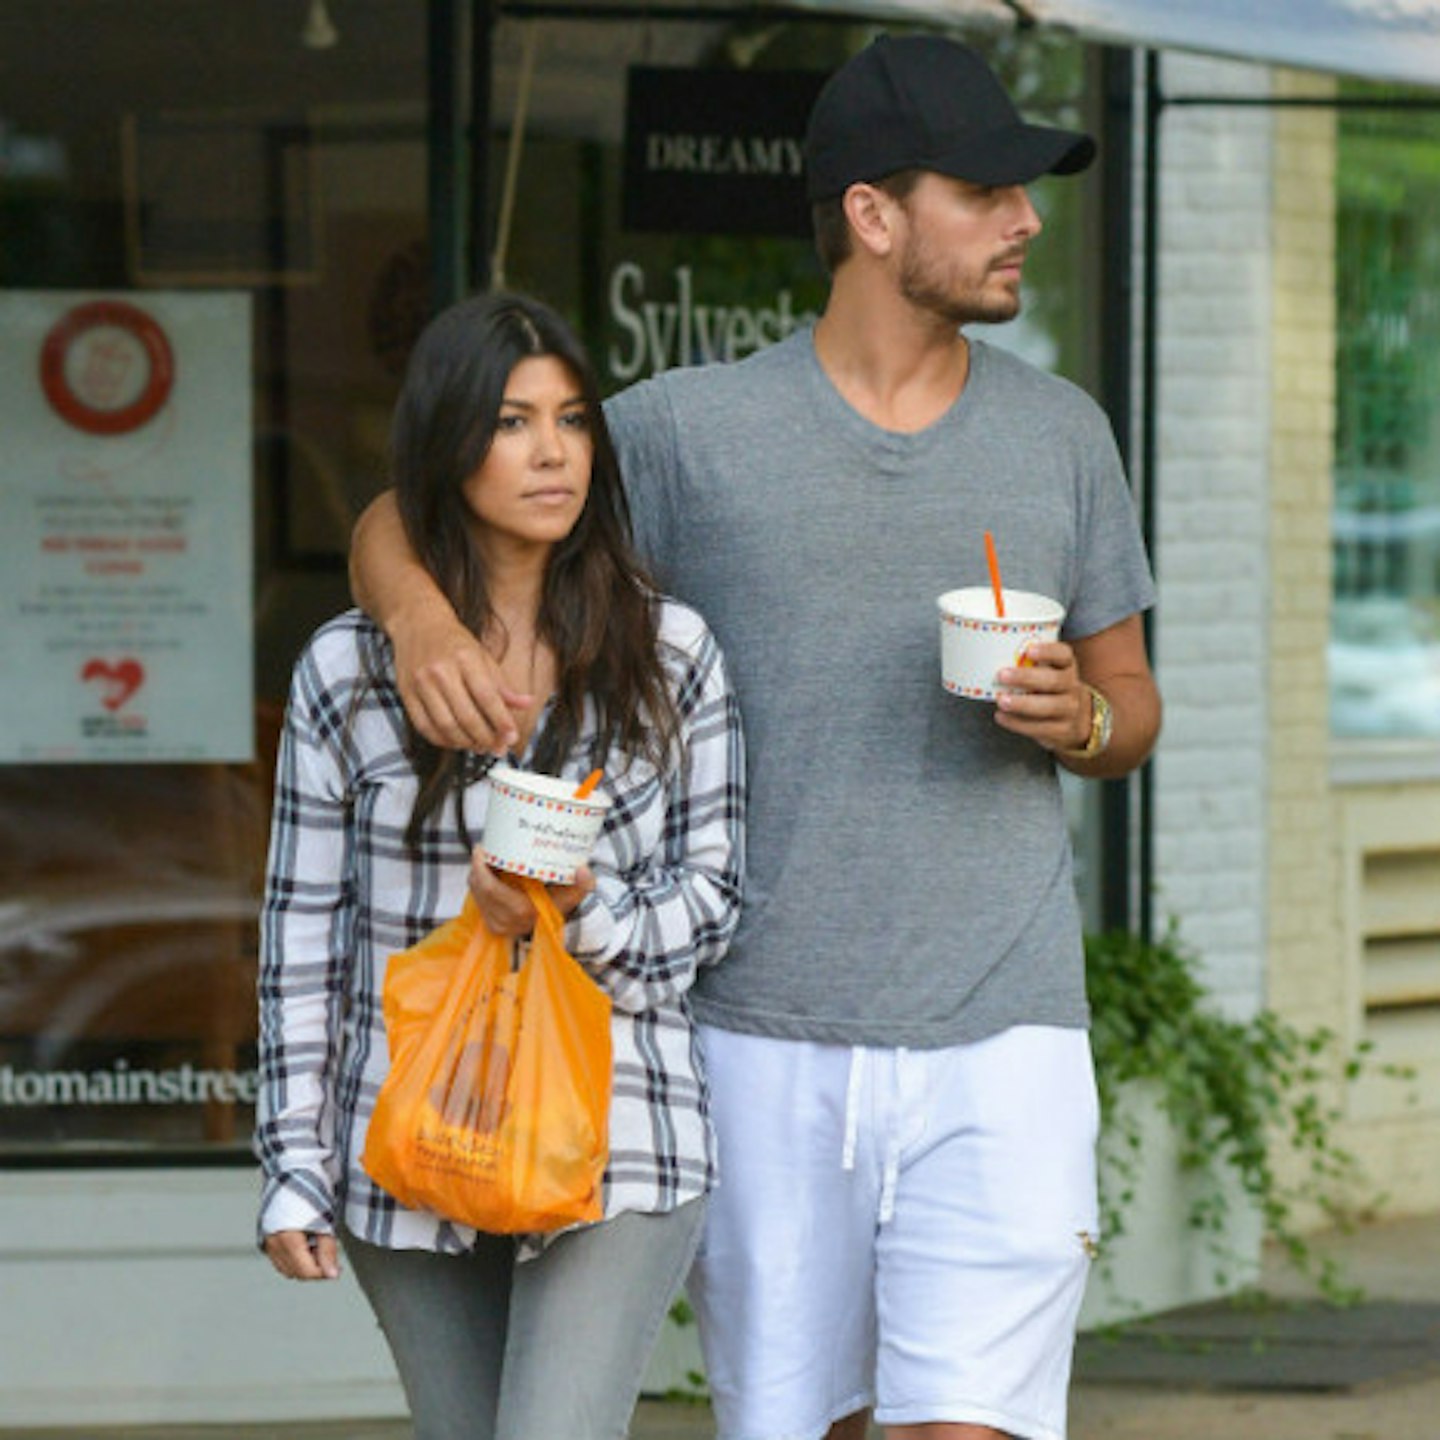 Kourtney is due to give birth to her third child with Scott Disick in December